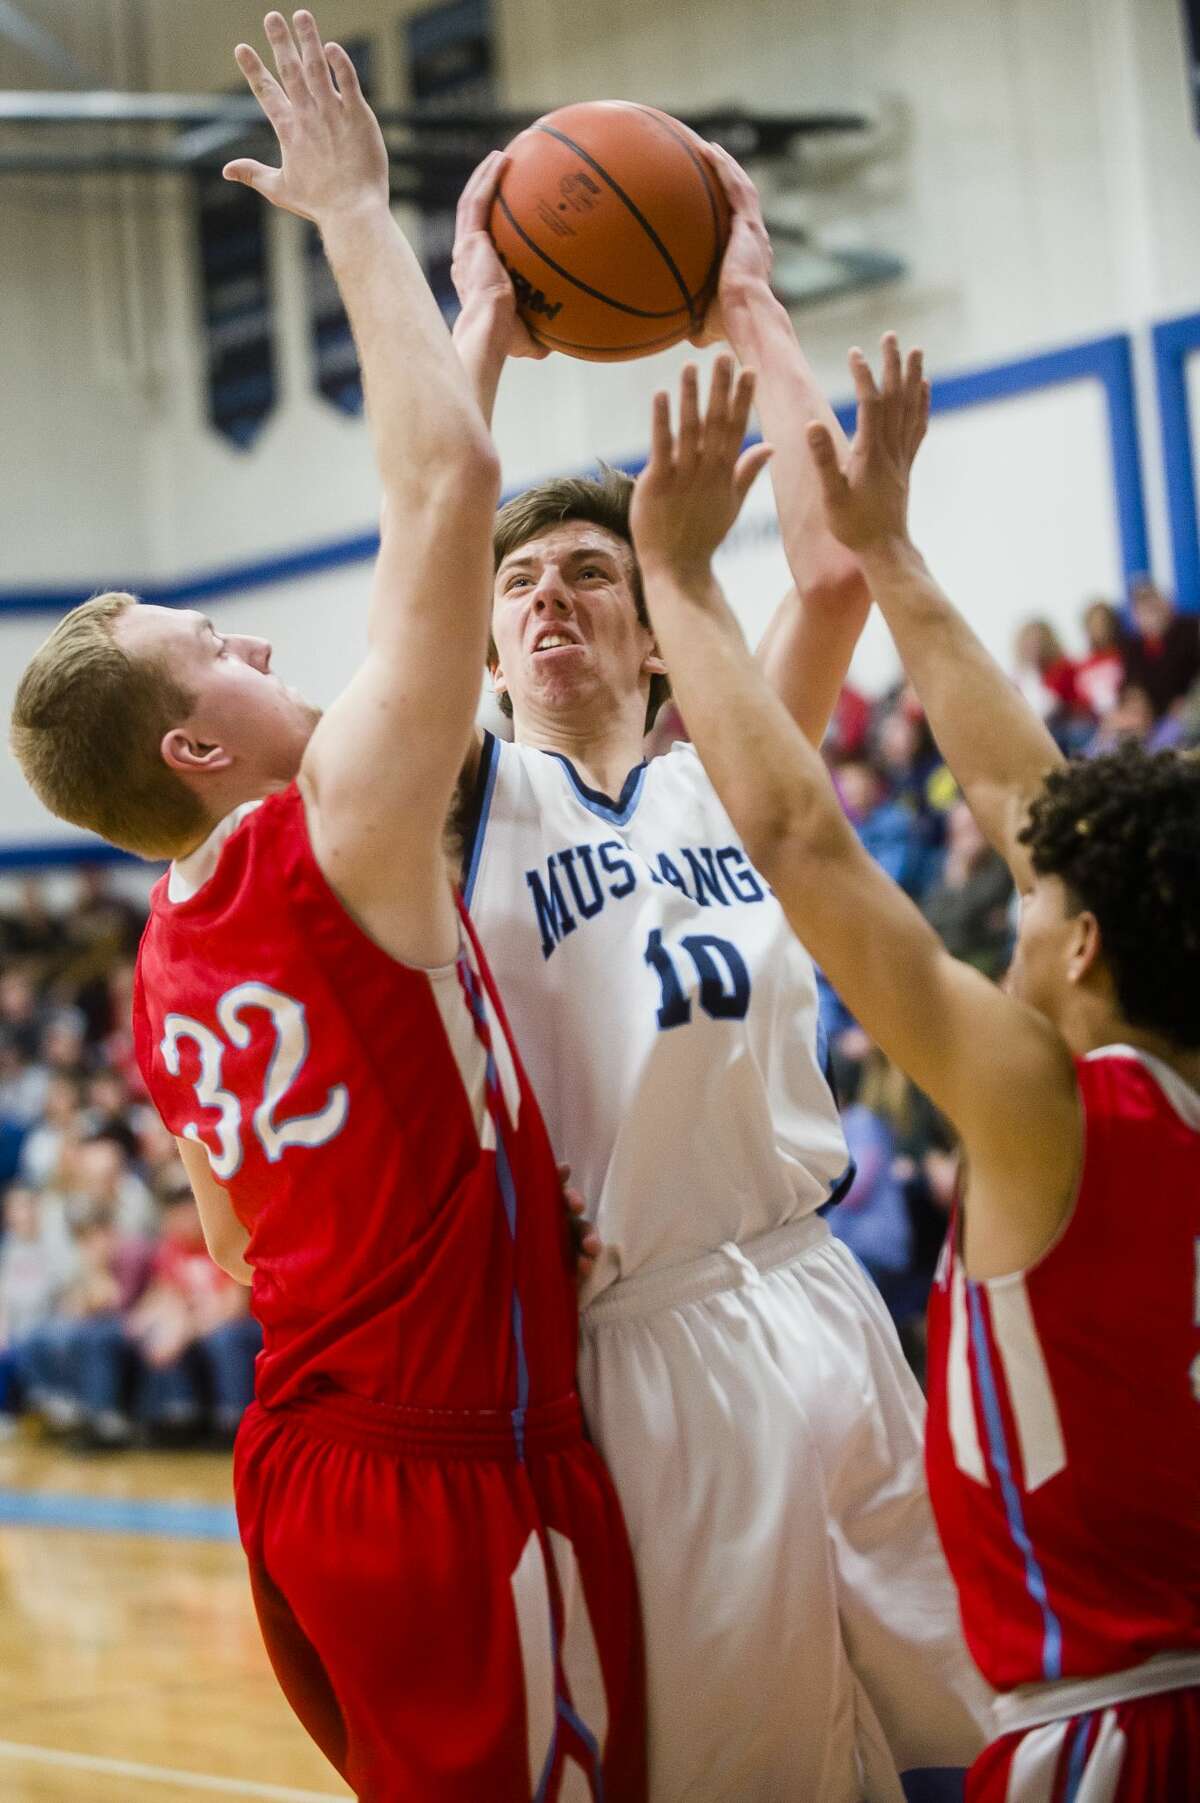 Meridian senior Hunter Wishowski takes a shot while Beaverton junior Logan Gerow, left, and senior Nate Taylor, right, guard him during their district championship game on Friday, March 9, 2018 at Meridian High School. (Katy Kildee/kkildee@mdn.net)